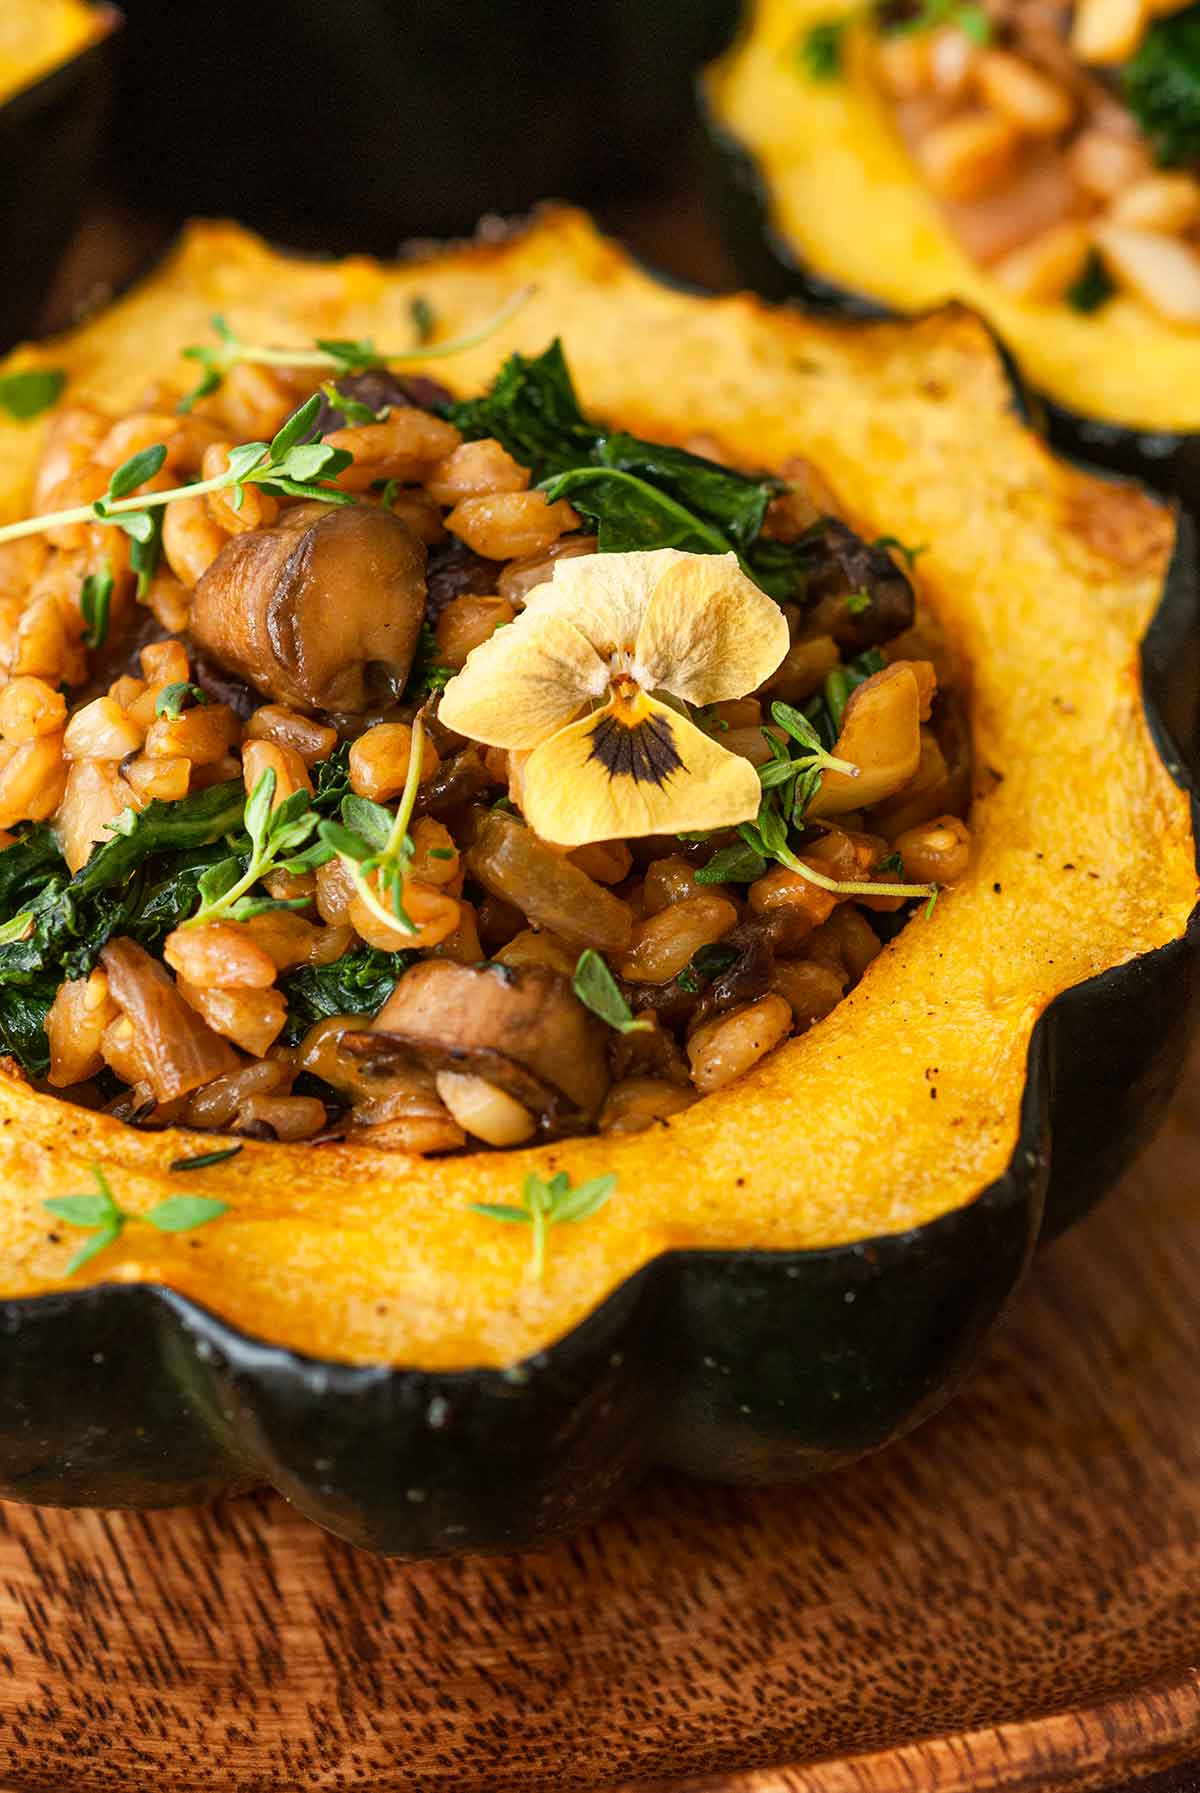 The stuffing on 1 acorn squash, garnished with thyme and a flower.